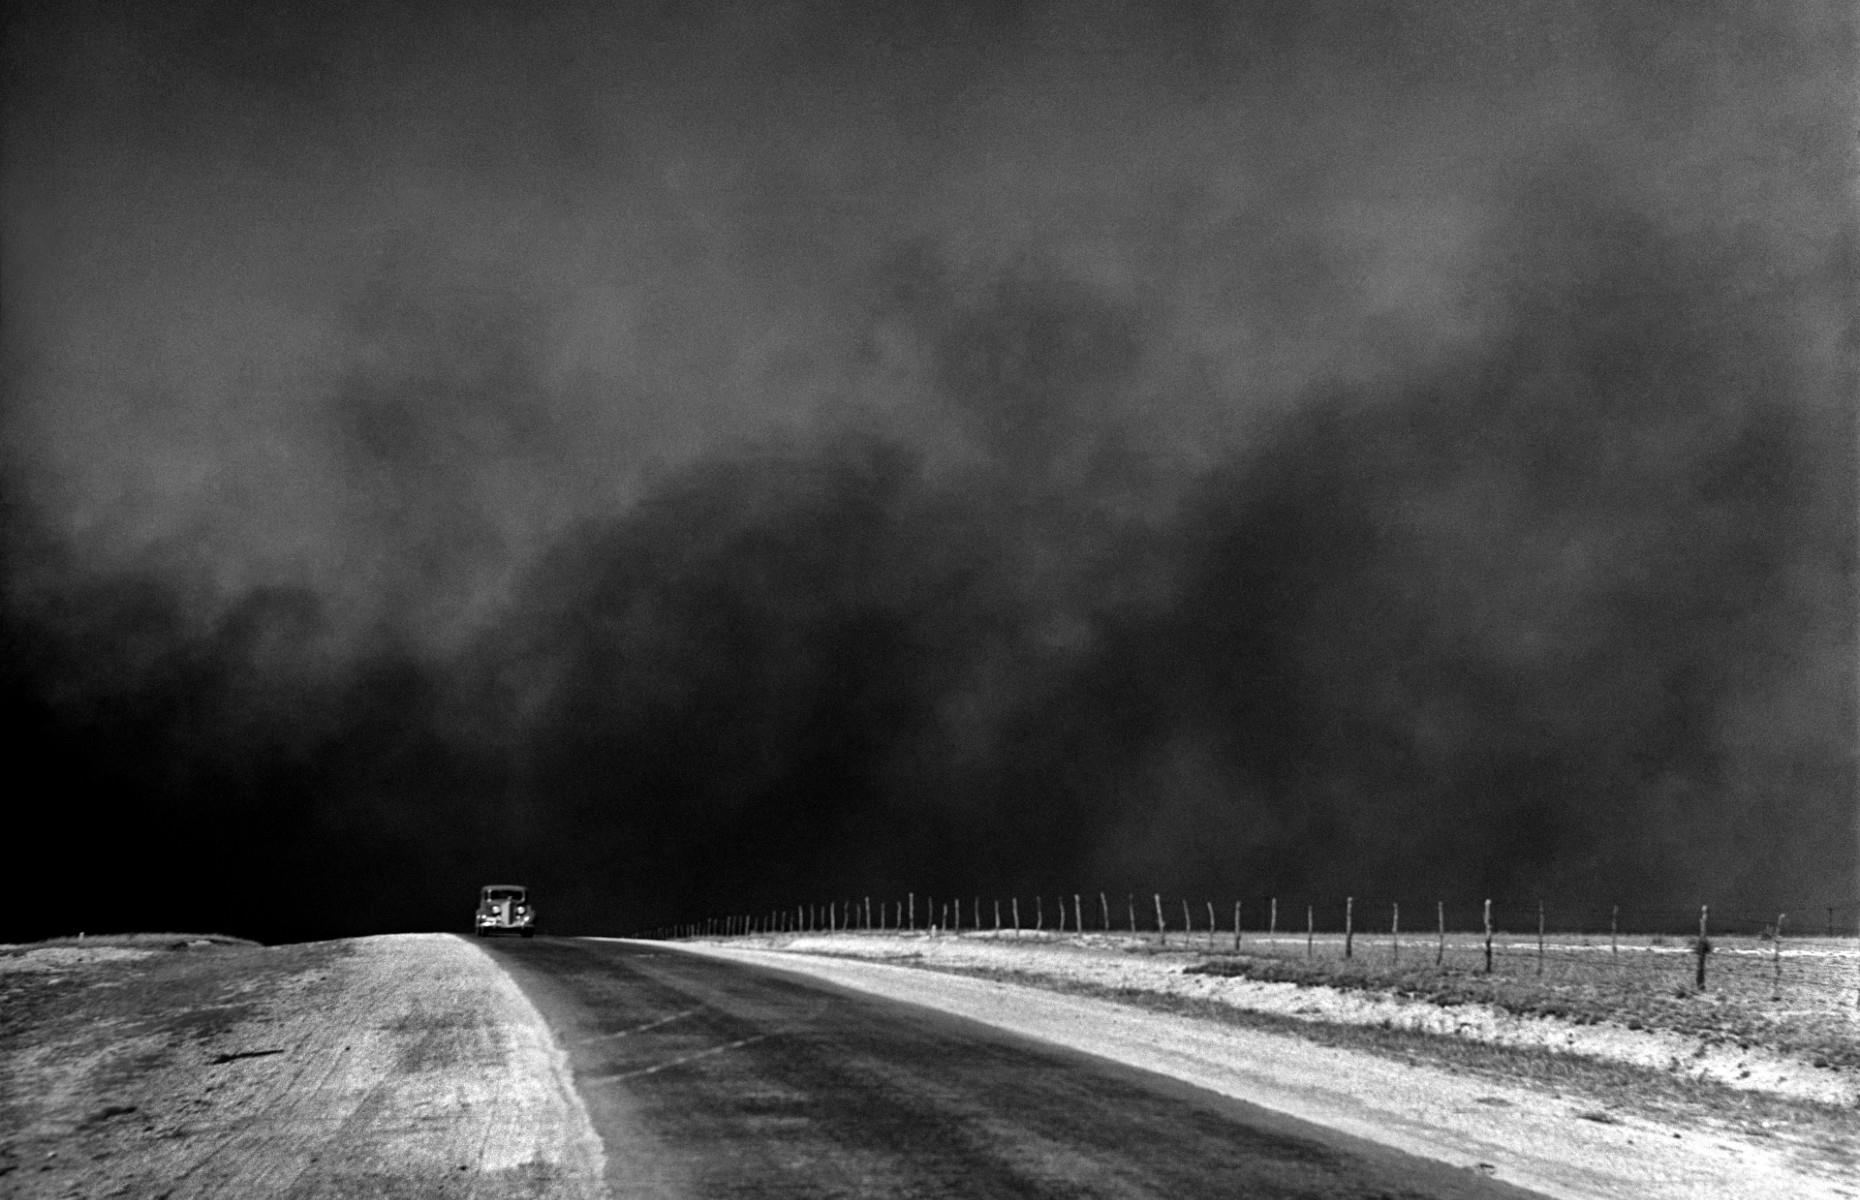 <p>The dust storms, nicknamed 'black blizzards' blew across the country in vast clouds, as shown here in Texas. The grubby air covered windows in New York and coated the decks of ships on the Atlantic.</p>  <p>President Roosevelt extended his New Deal to include tree planting and reforestation of farmland, but the Dust Bowl only began to ease when regular rainfall patterns resumed in 1939.</p>